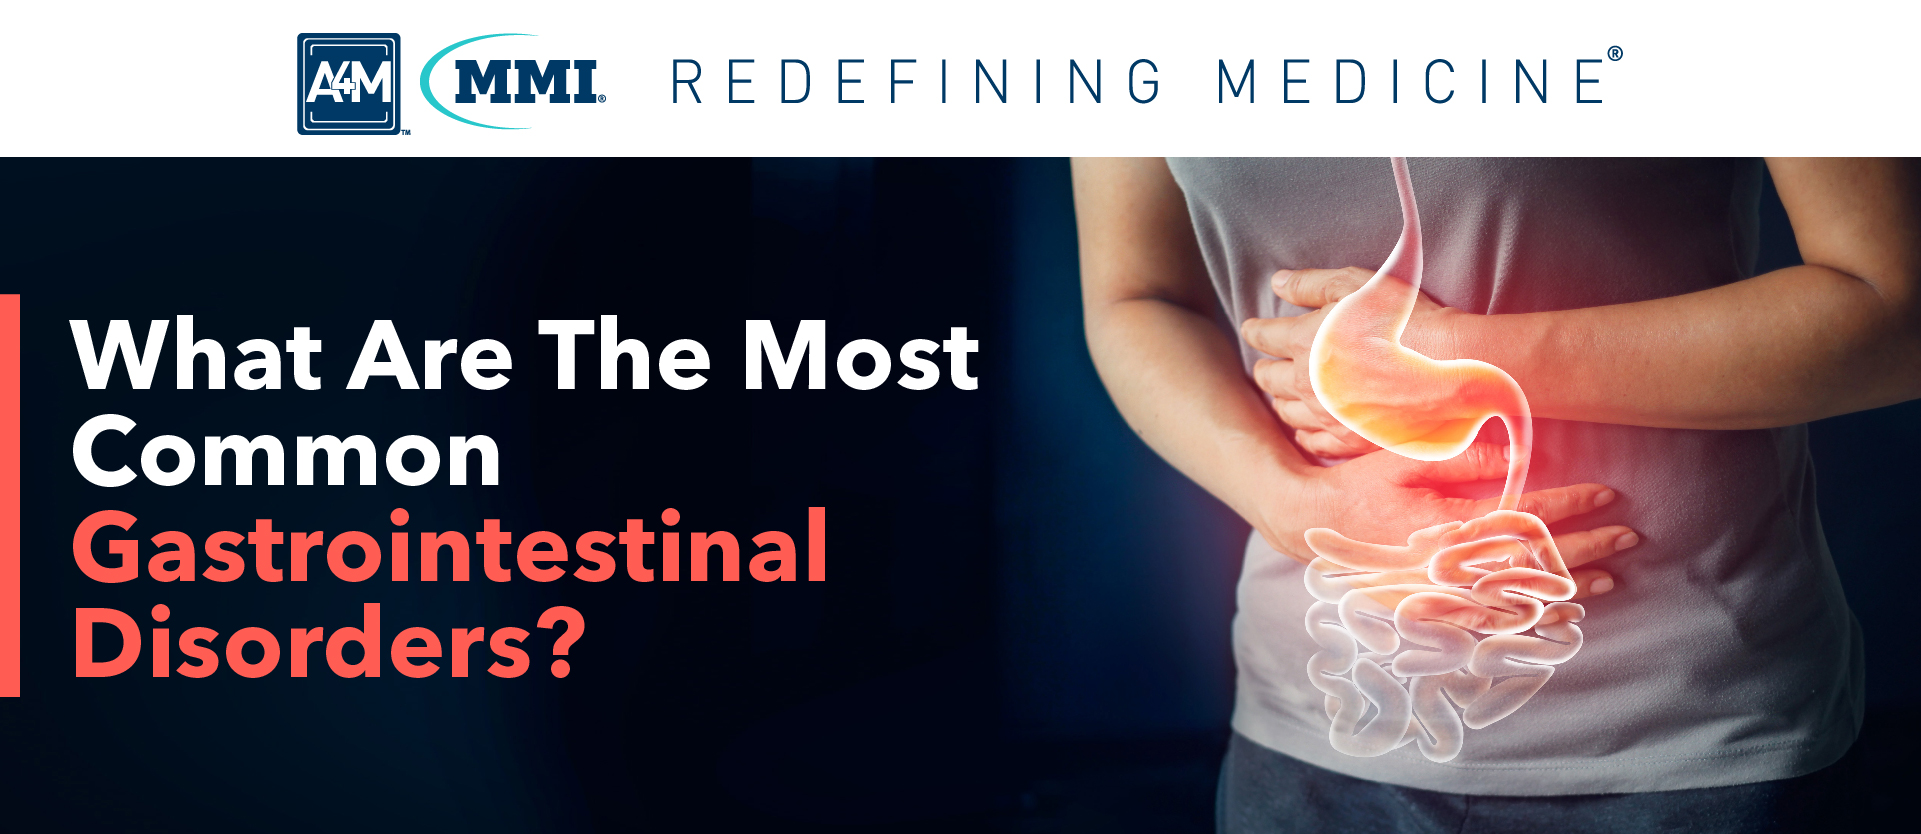 What Are The Most Common Gastrointestinal Disorders • A4m Blog